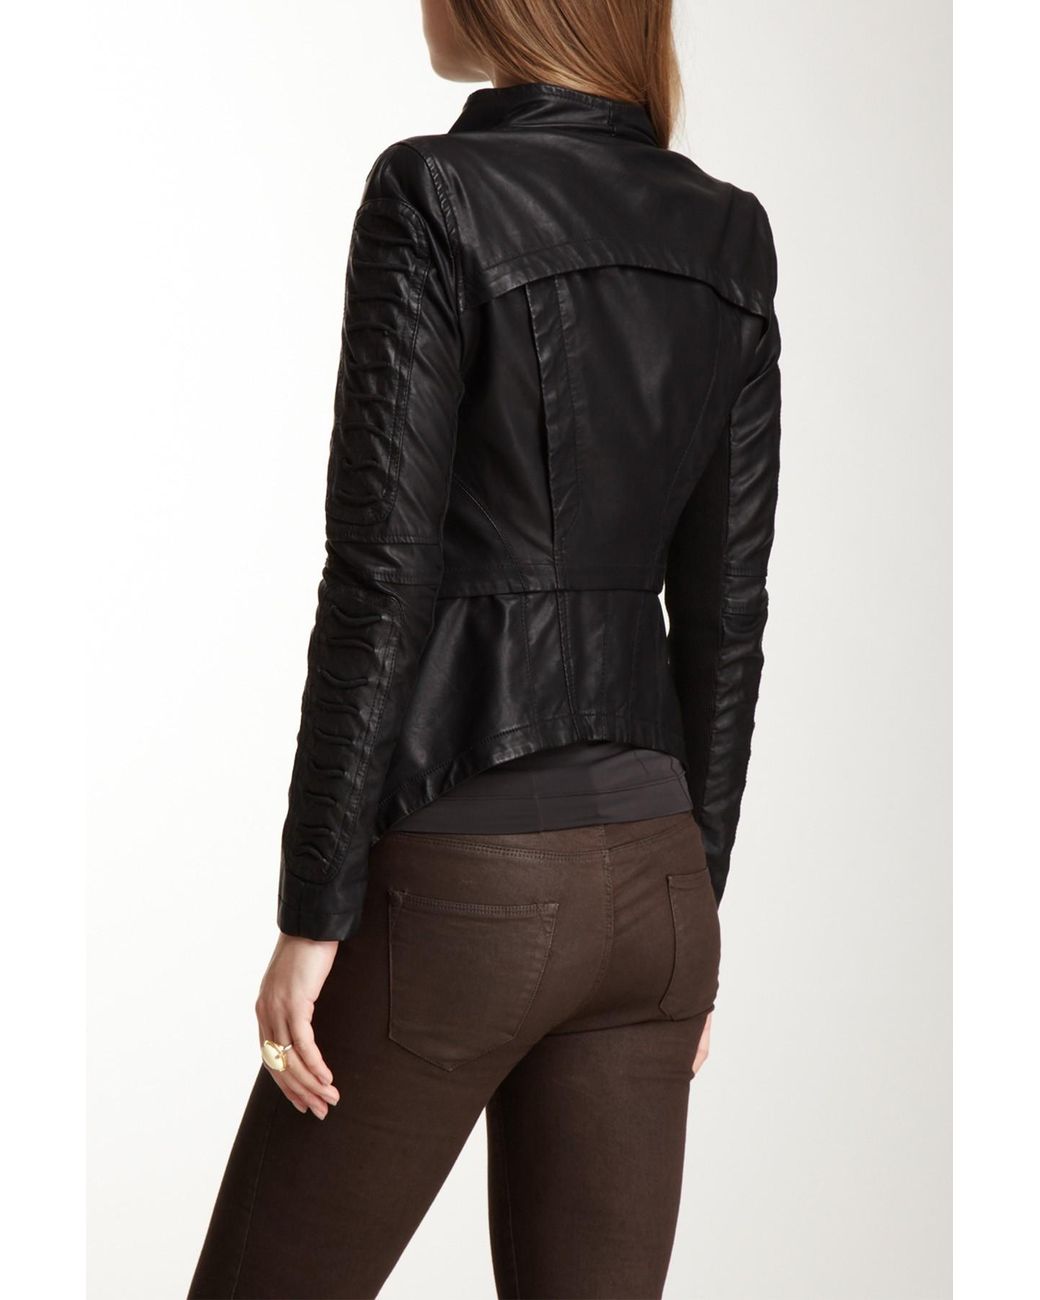 Gracia Cotton Faux Leather Jacket in Black | Lyst